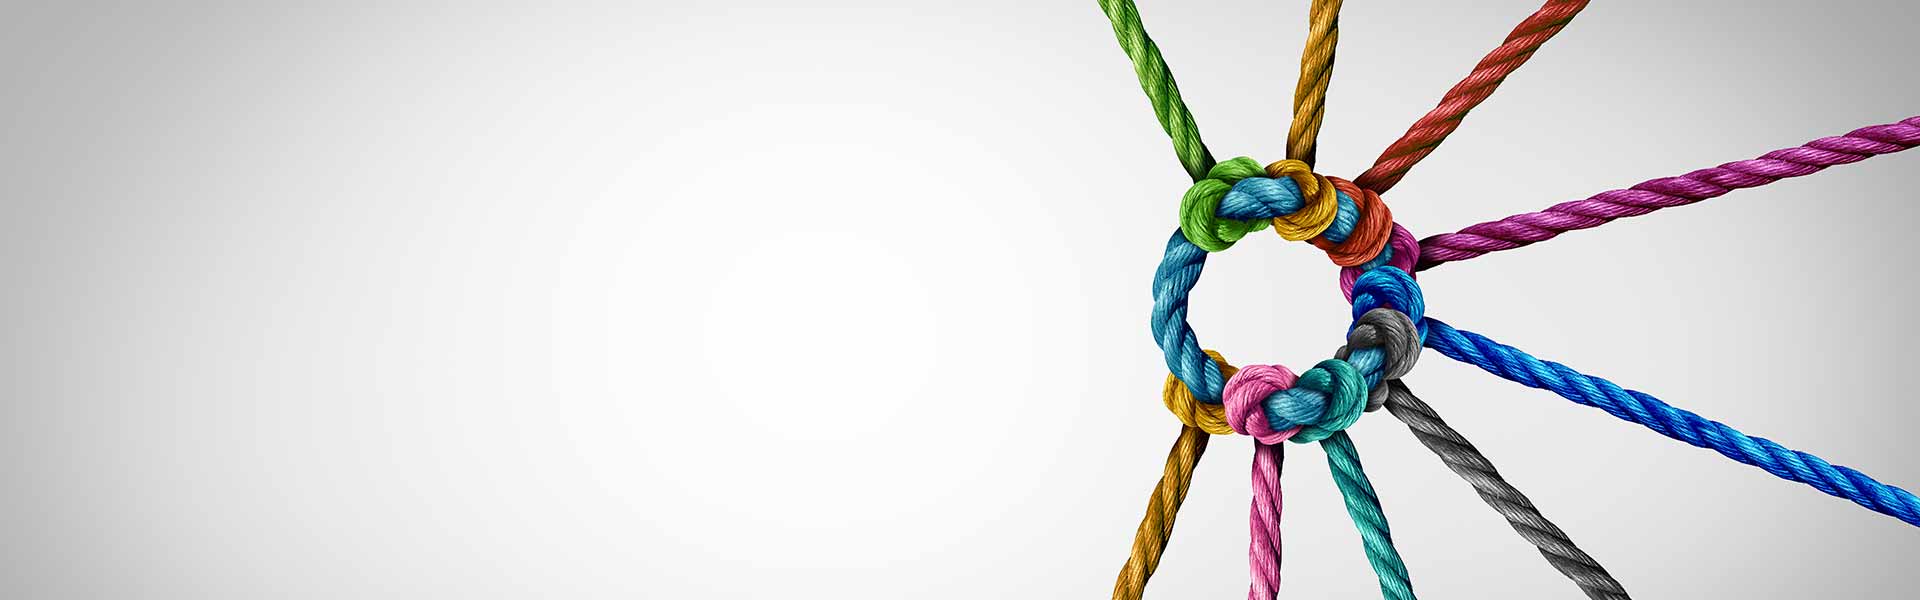 rainbow coloured knotted ropes